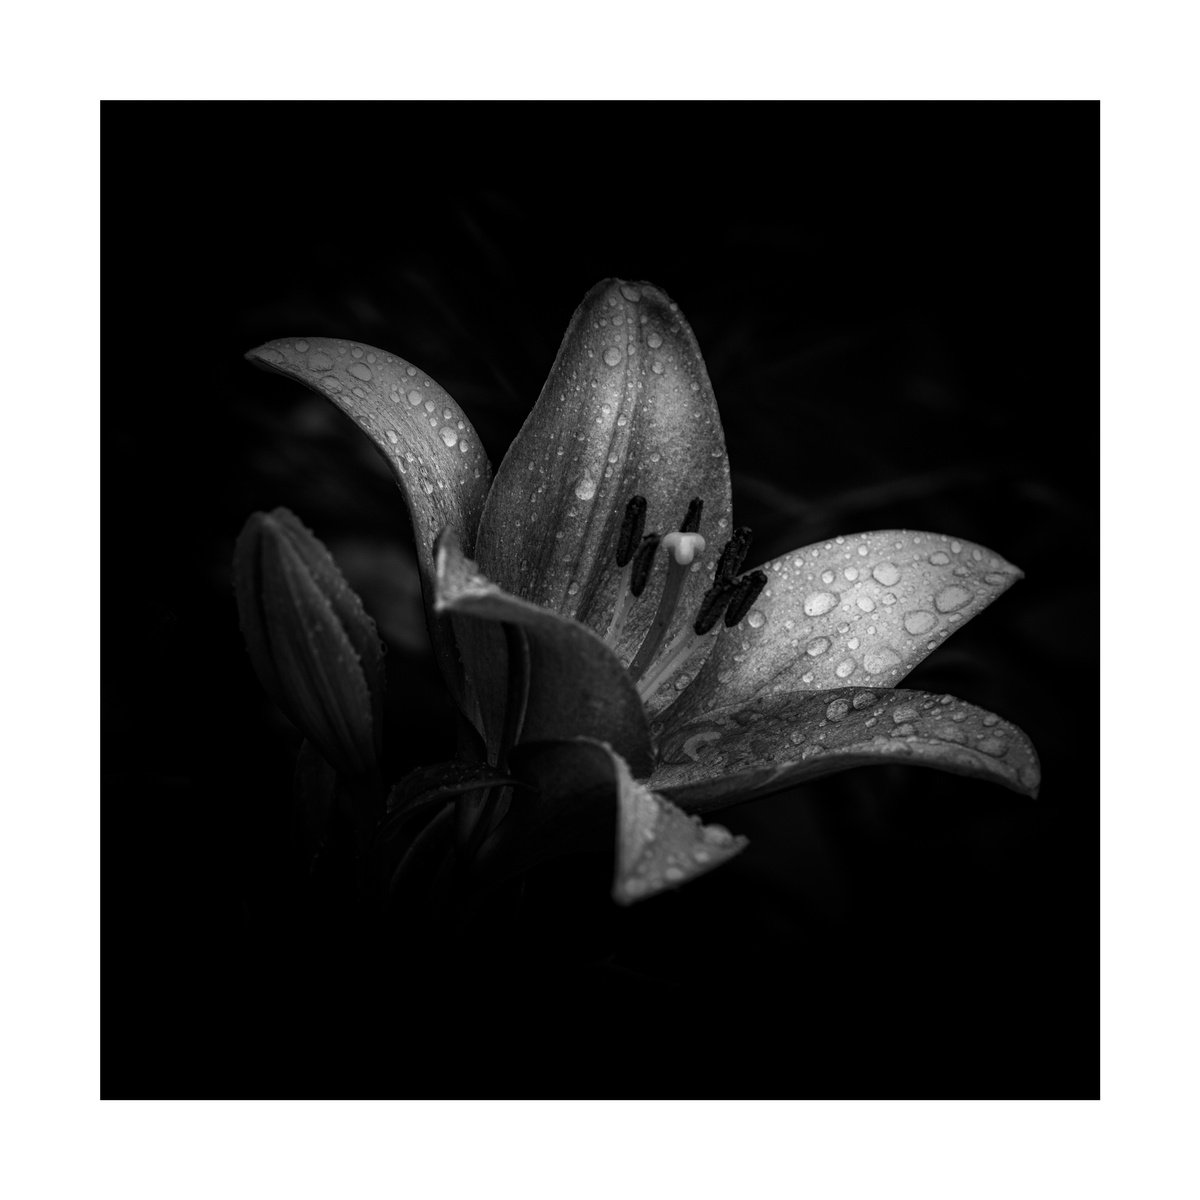 Lily Blooms Number 8 - 12x12 inch Fine Art Photography Limited Edition #1/25 by Graham Briggs